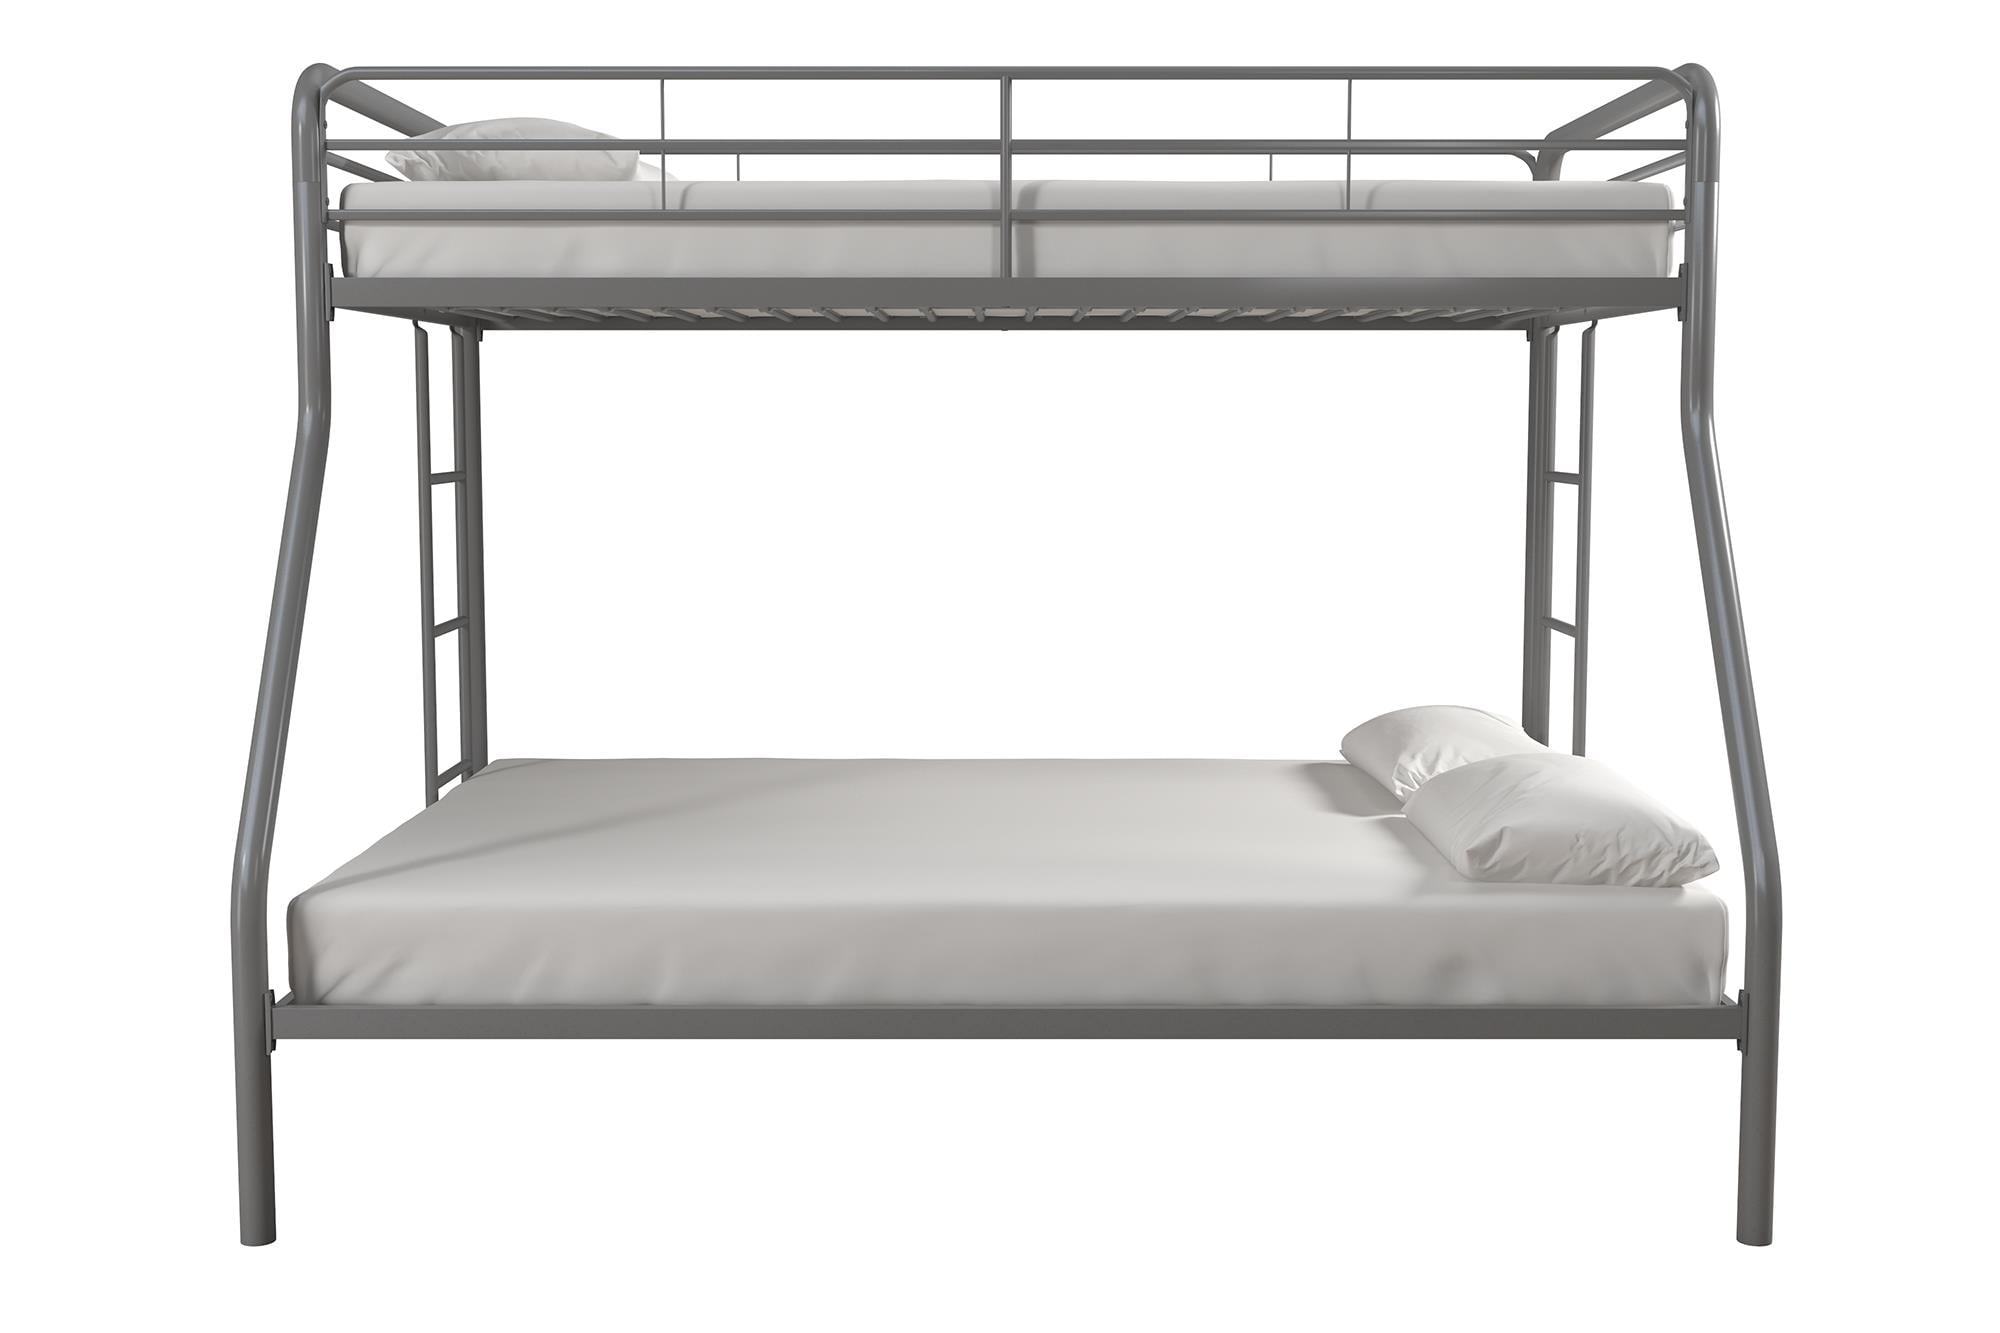 Dhp Twin Over Full Metal Bunk Bed Frame, Dorel Twin Over Full Metal Bunk Bed